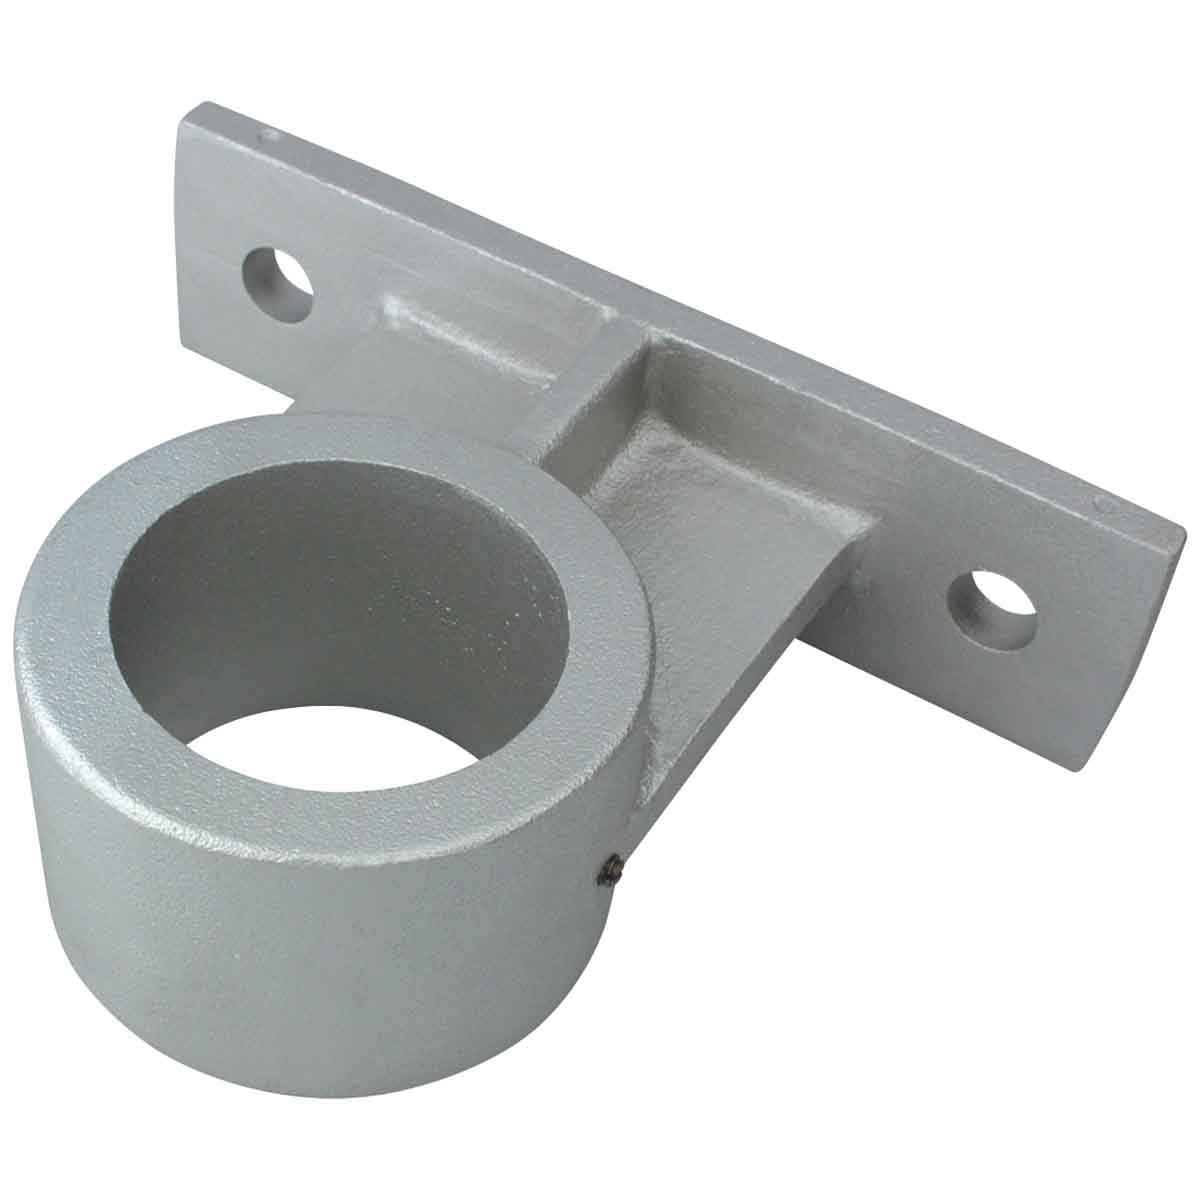 Vertical Wall Mount Series - Brackets Only